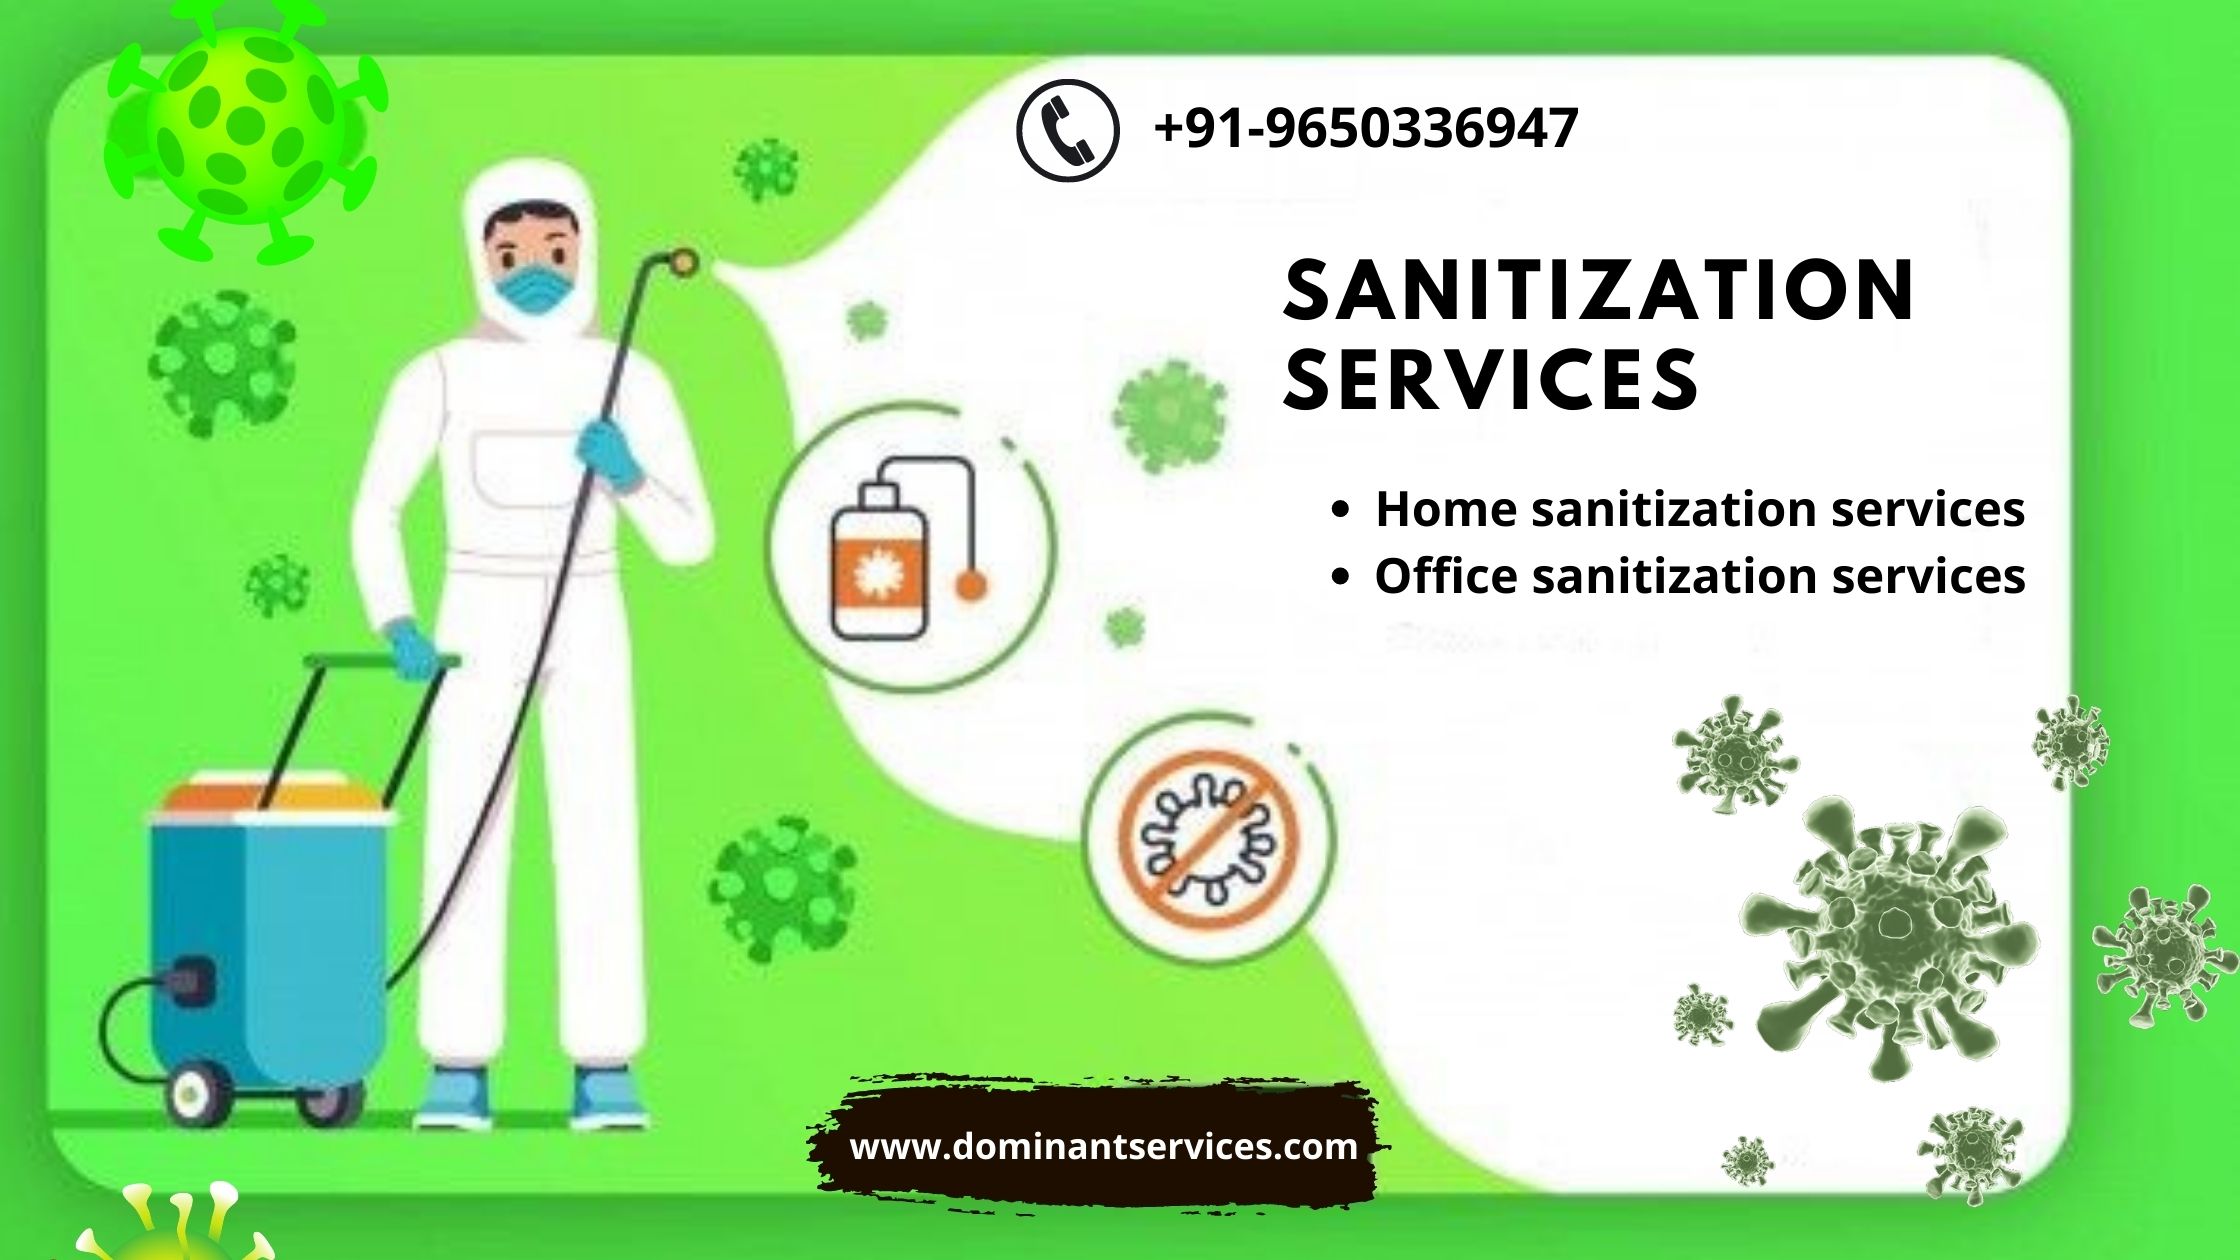 You are currently viewing Home Sanitization Services for your house, to get rid of viruses and germs.